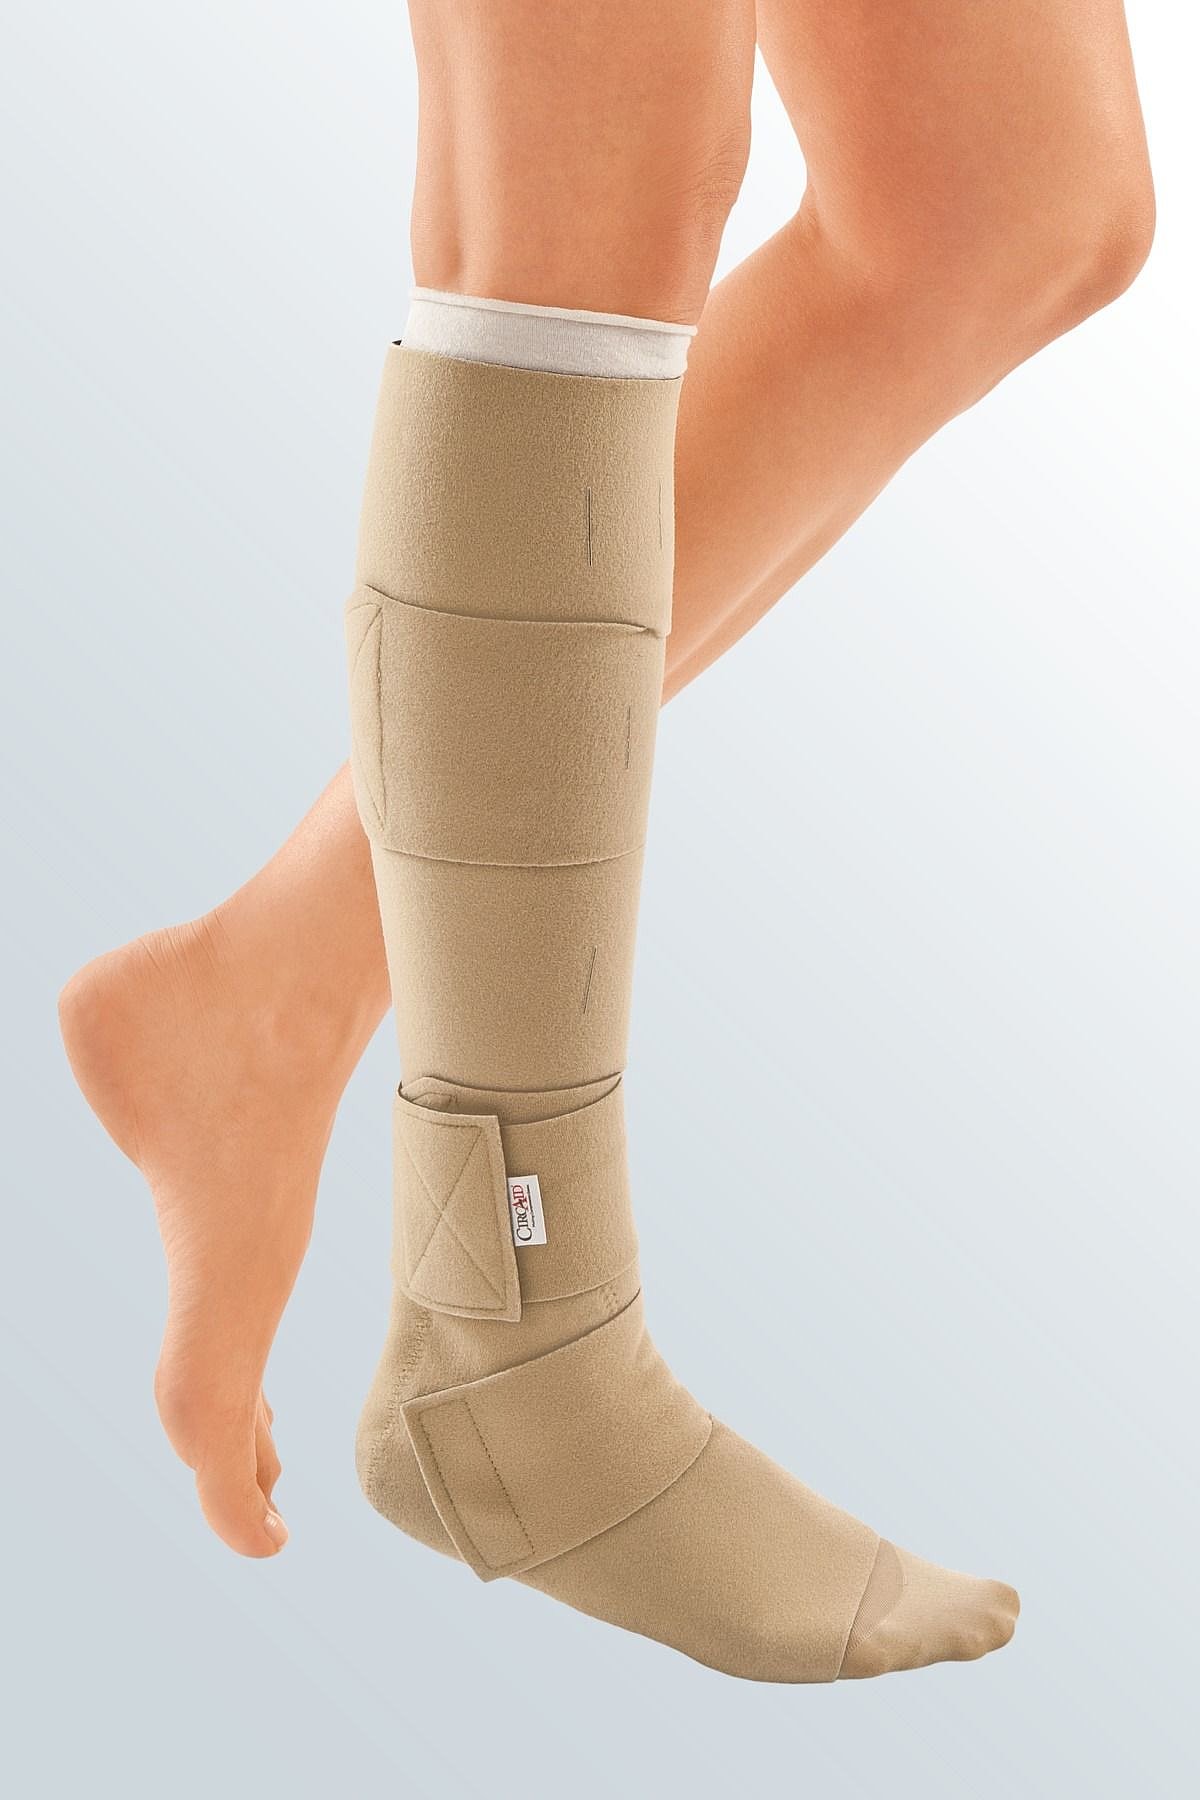 CircAid® Juxta Fit™ - Adelaide Compression Products